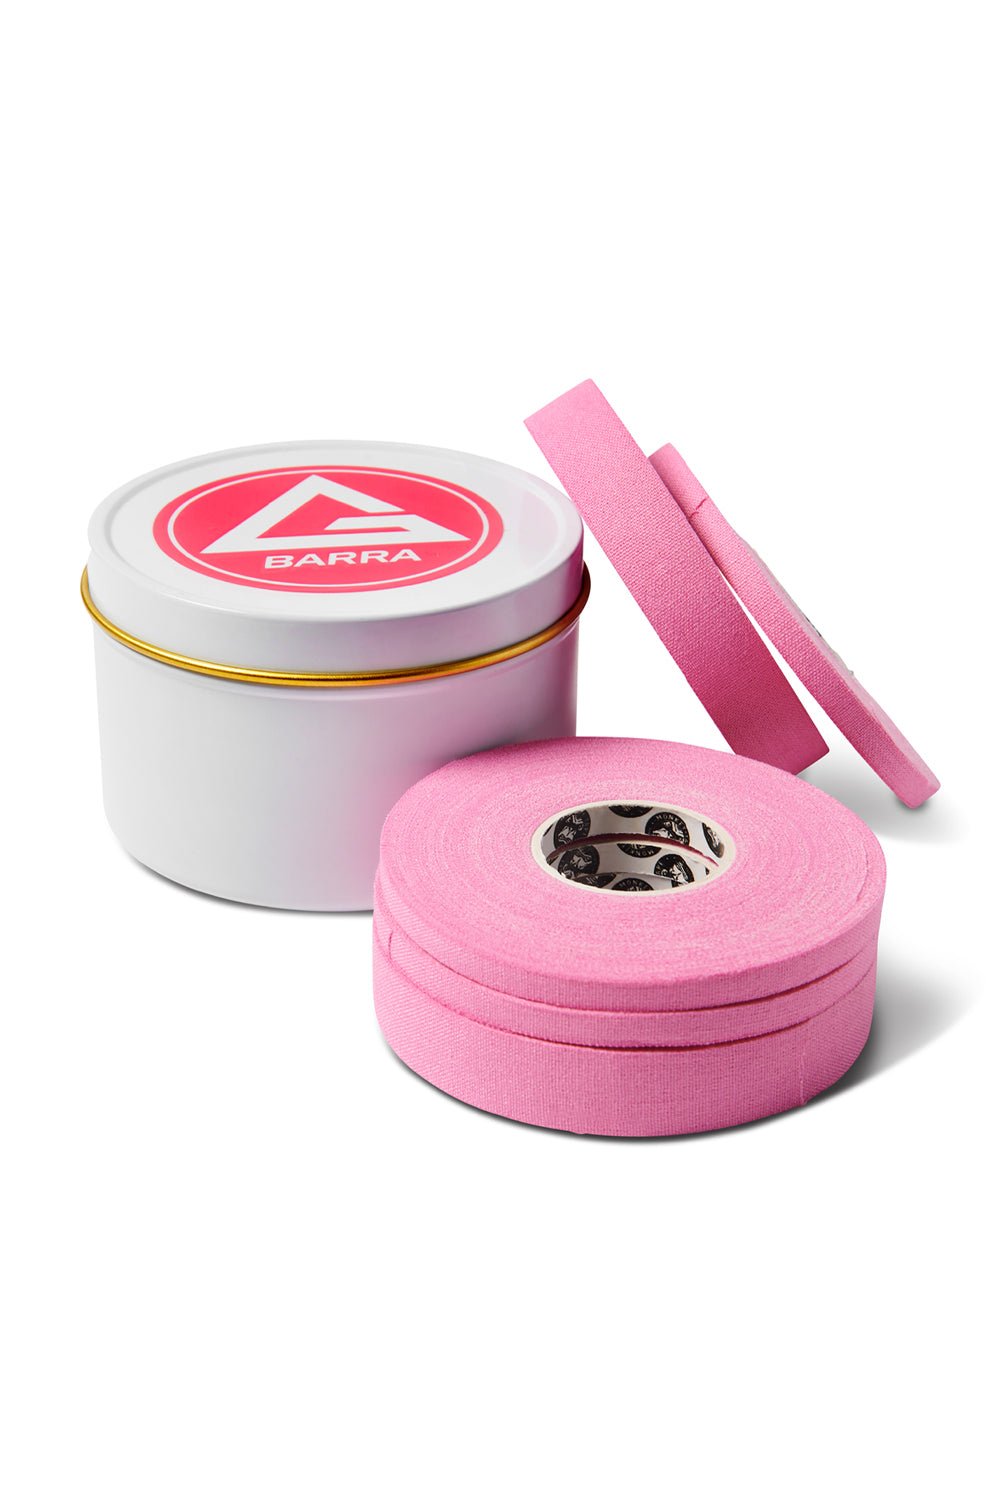 Gracie Barra Finger Tape Tin by Monkey Tape - Pink